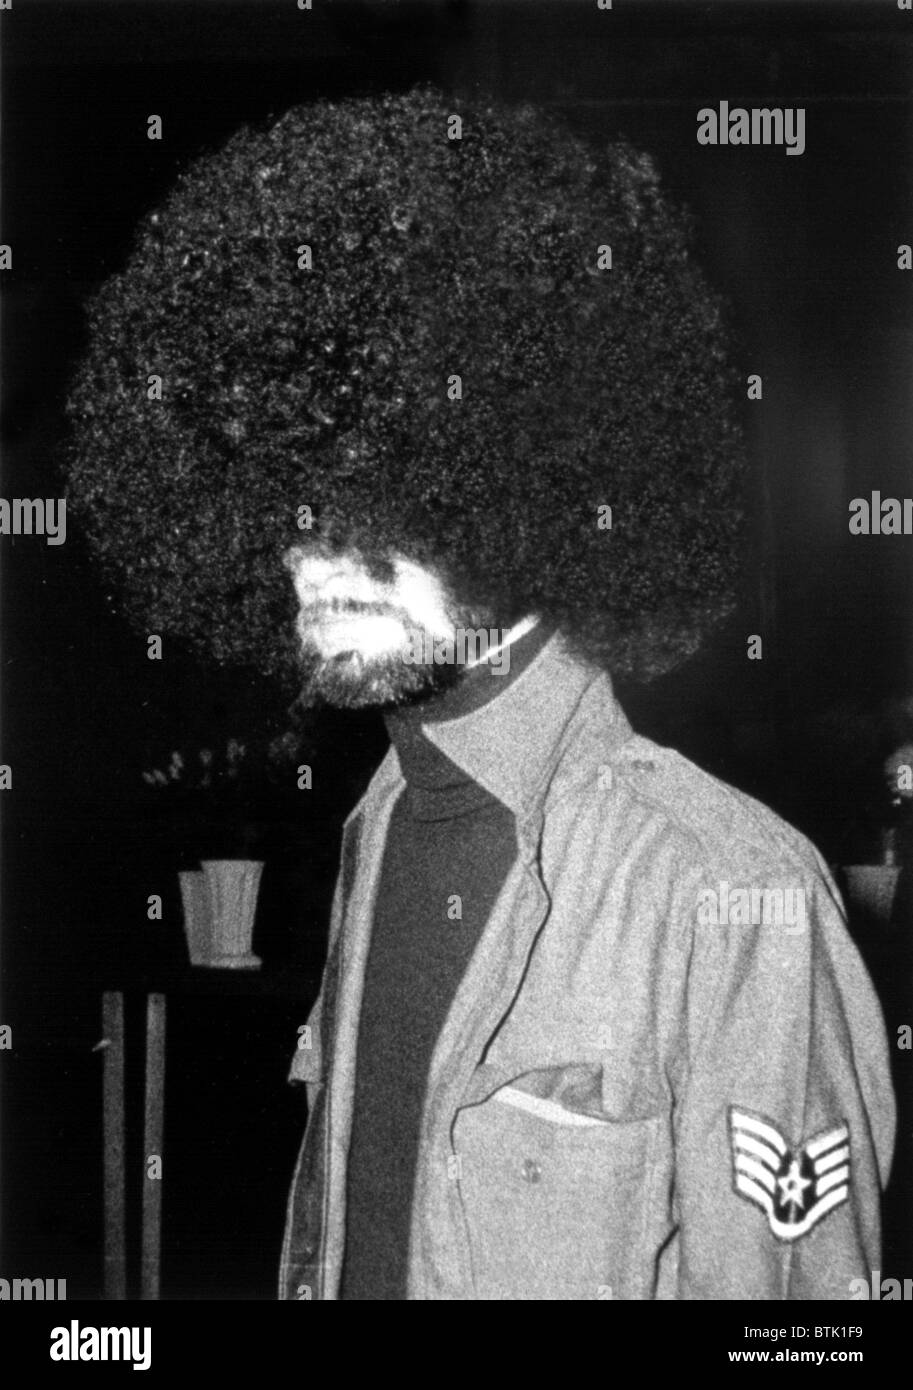 Man with an Afro, New York City, June, 1974. Stock Photo